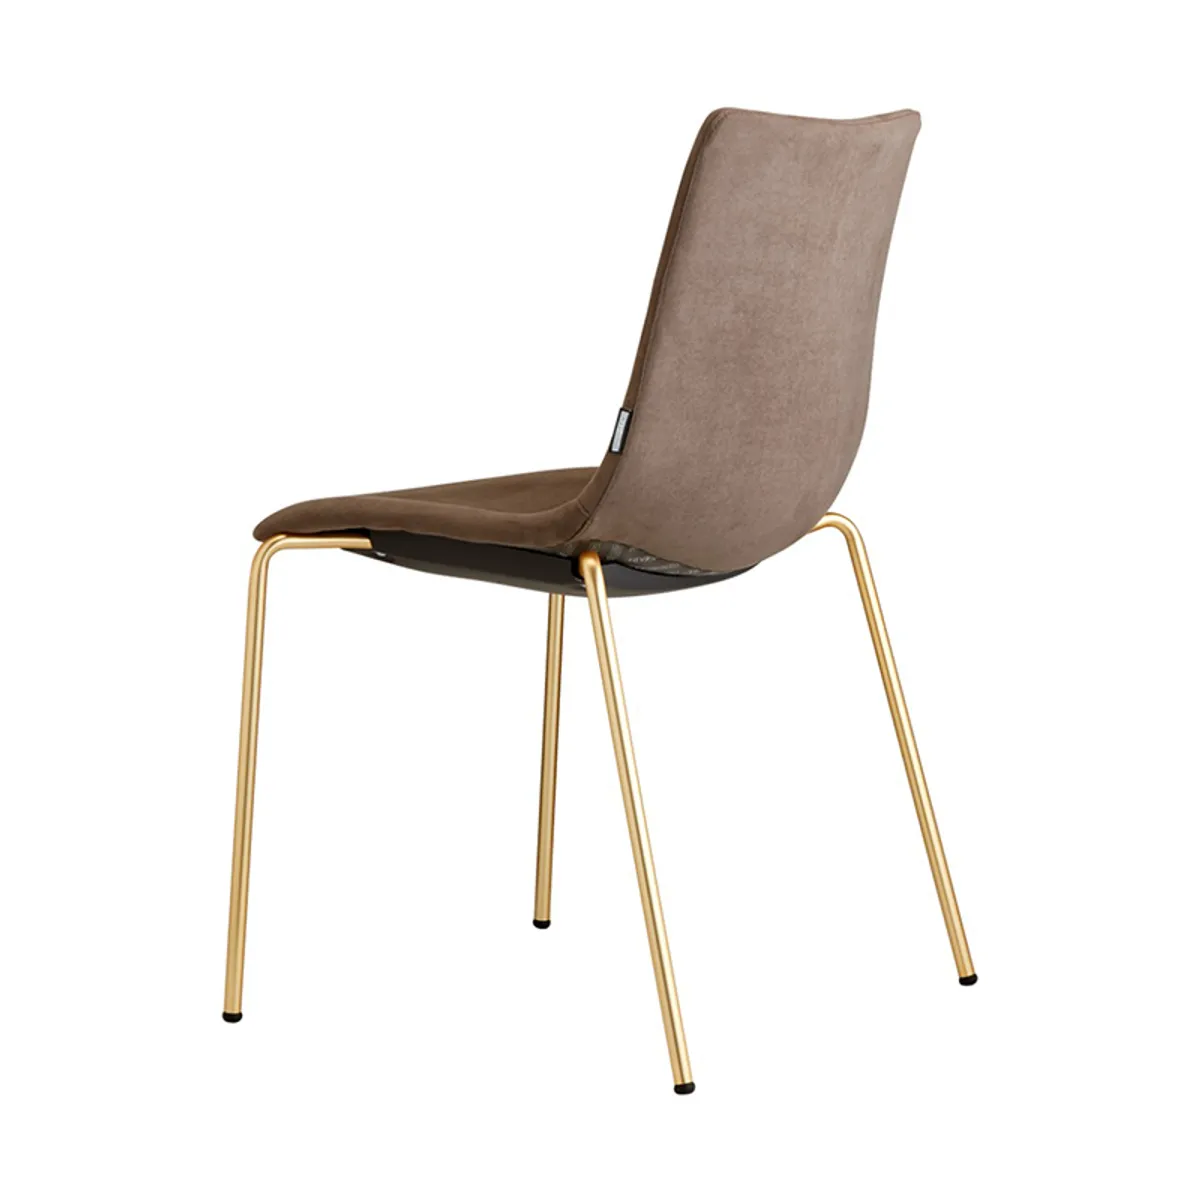 Selina Side Chair With Gold Metal Legs And Taupe Upholstery Stackable Chair For Cafes And Restaurants By Insideoutcontracts